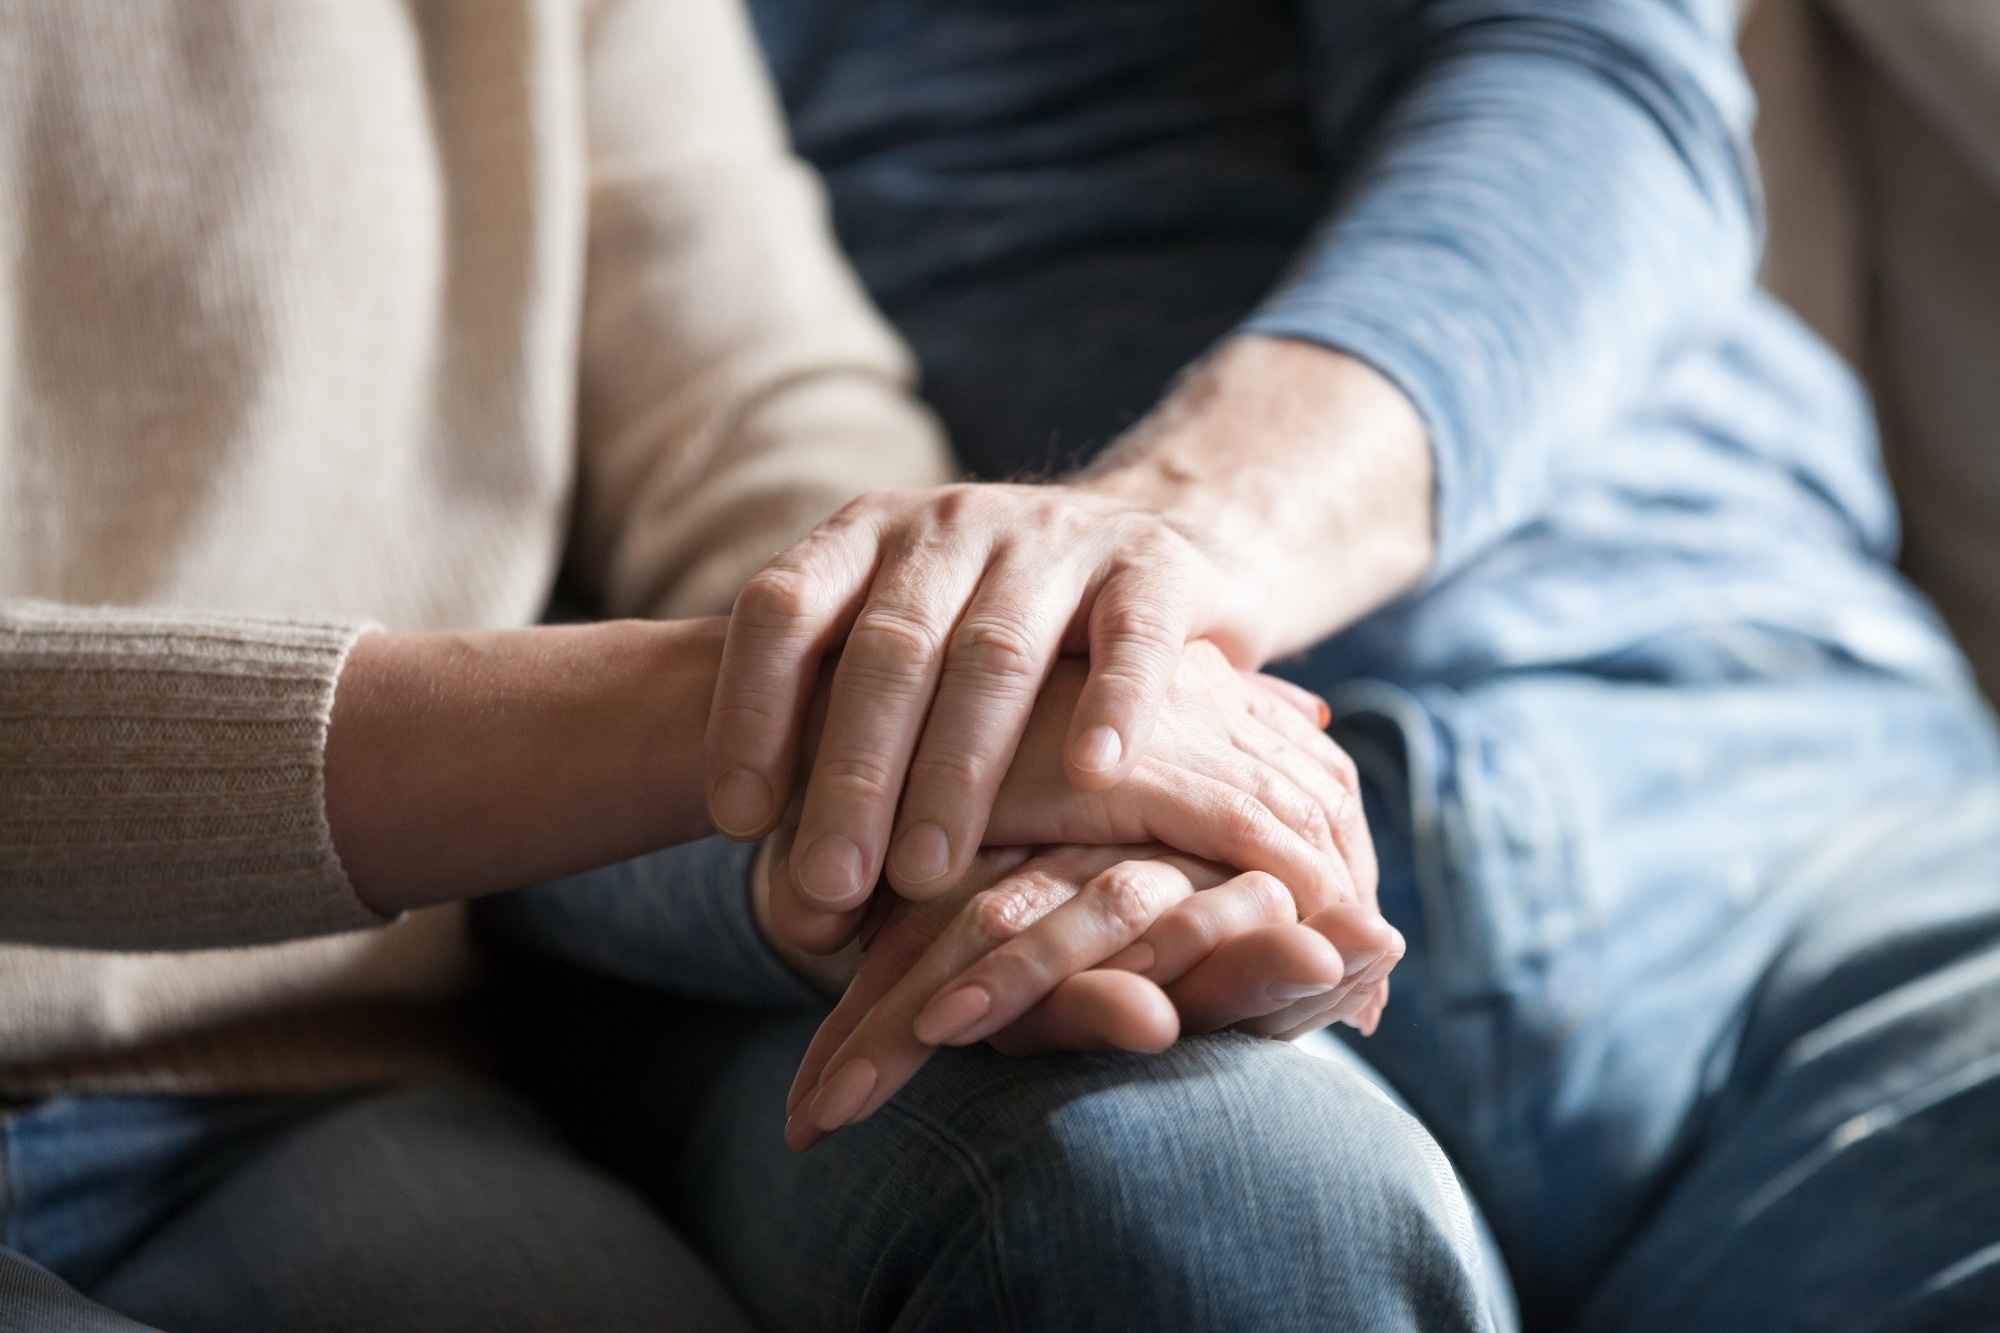 Study: Traumatic life events and risk for dementia: a systematic review and meta-analysis. Image Credit: fizkes/Shutterstock.com